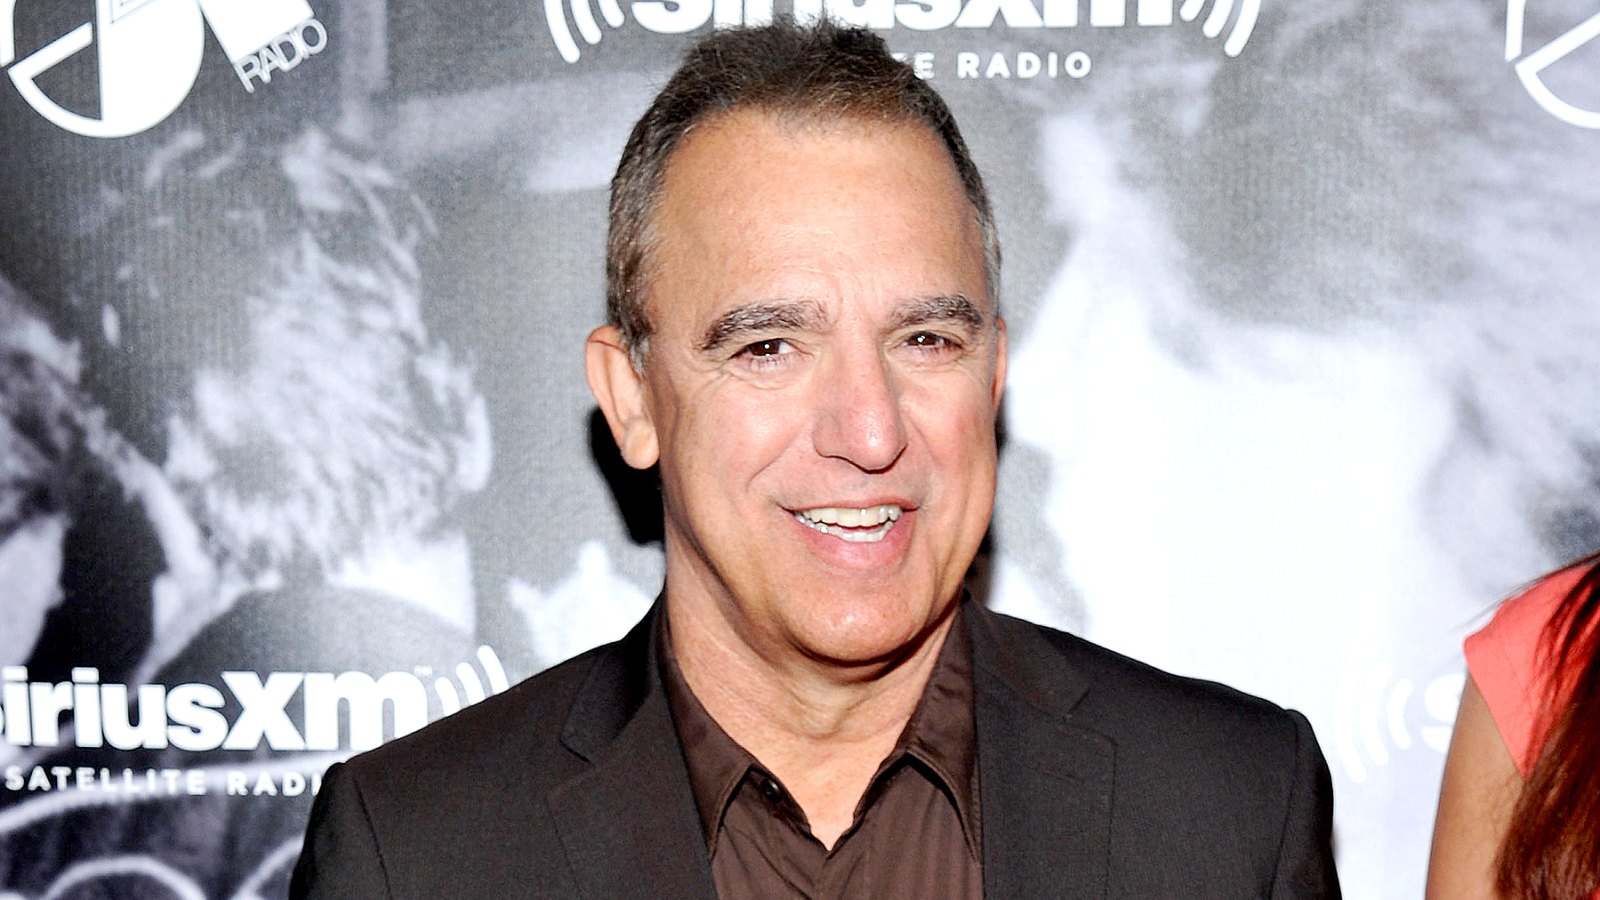 Jay Thomas attends SiriusXM's "One Night Only" at Studio 54 on October 18, 2011 in New York City.